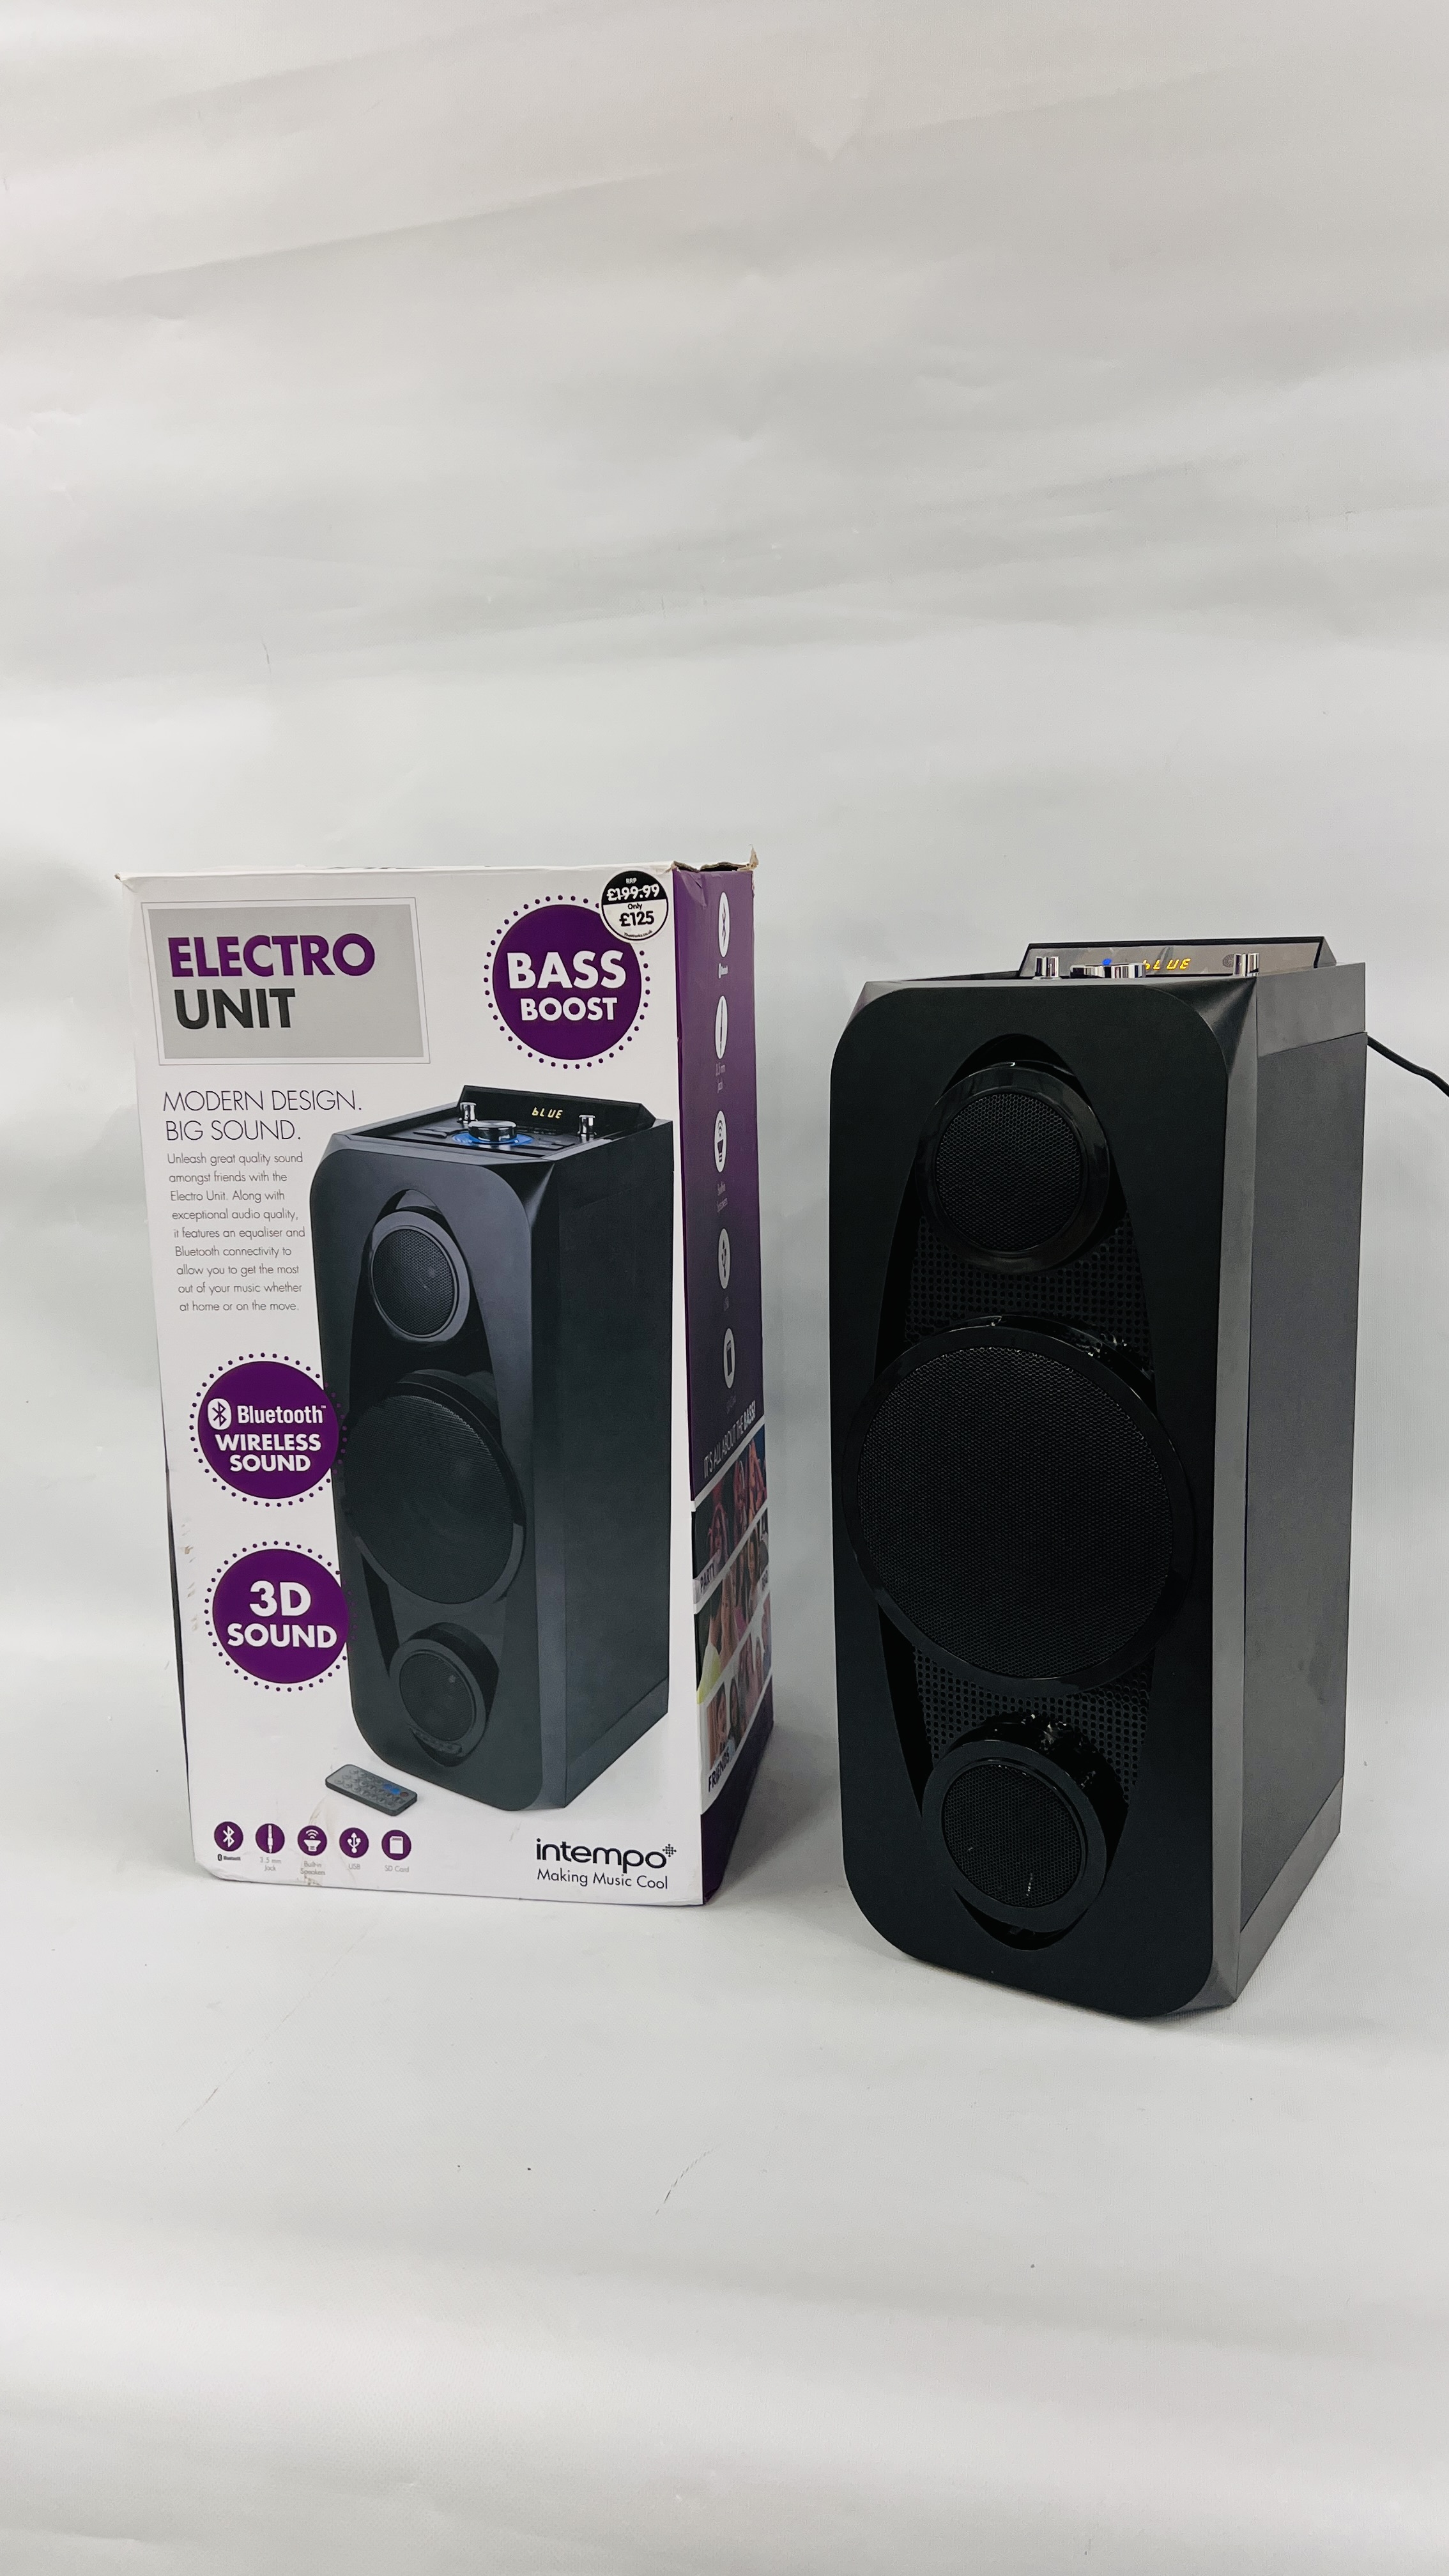 A BOXED INTEMPO ELECTRO UNIT LOUD SPEAKER - SOLD AS SEEN